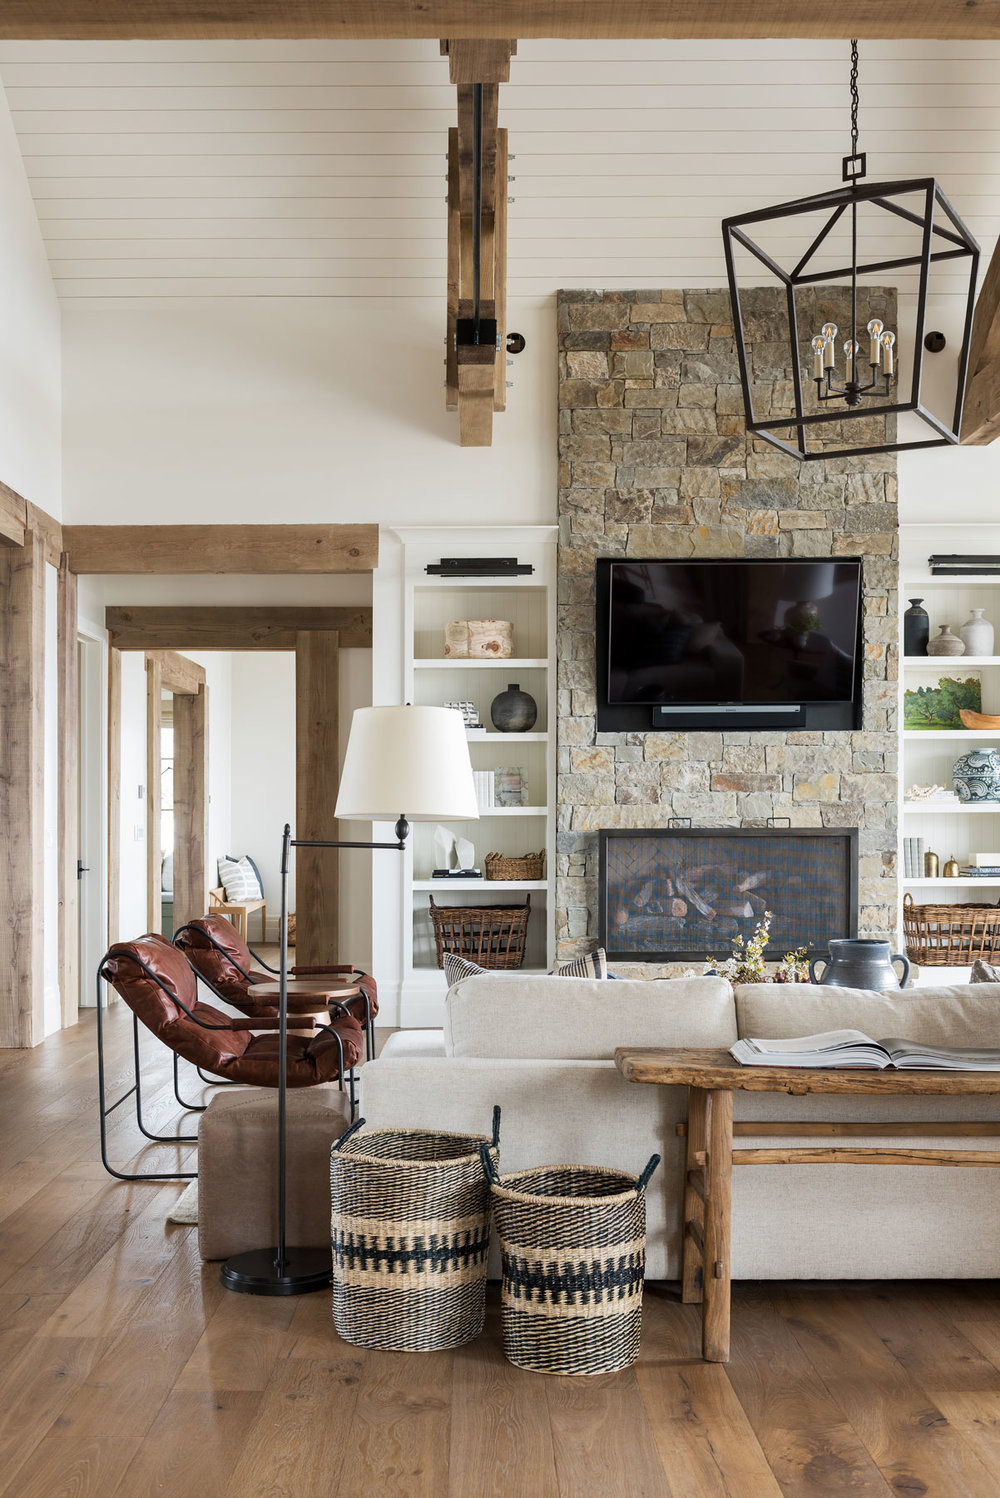 Living room with stone fireplace with sofa and leather chairs